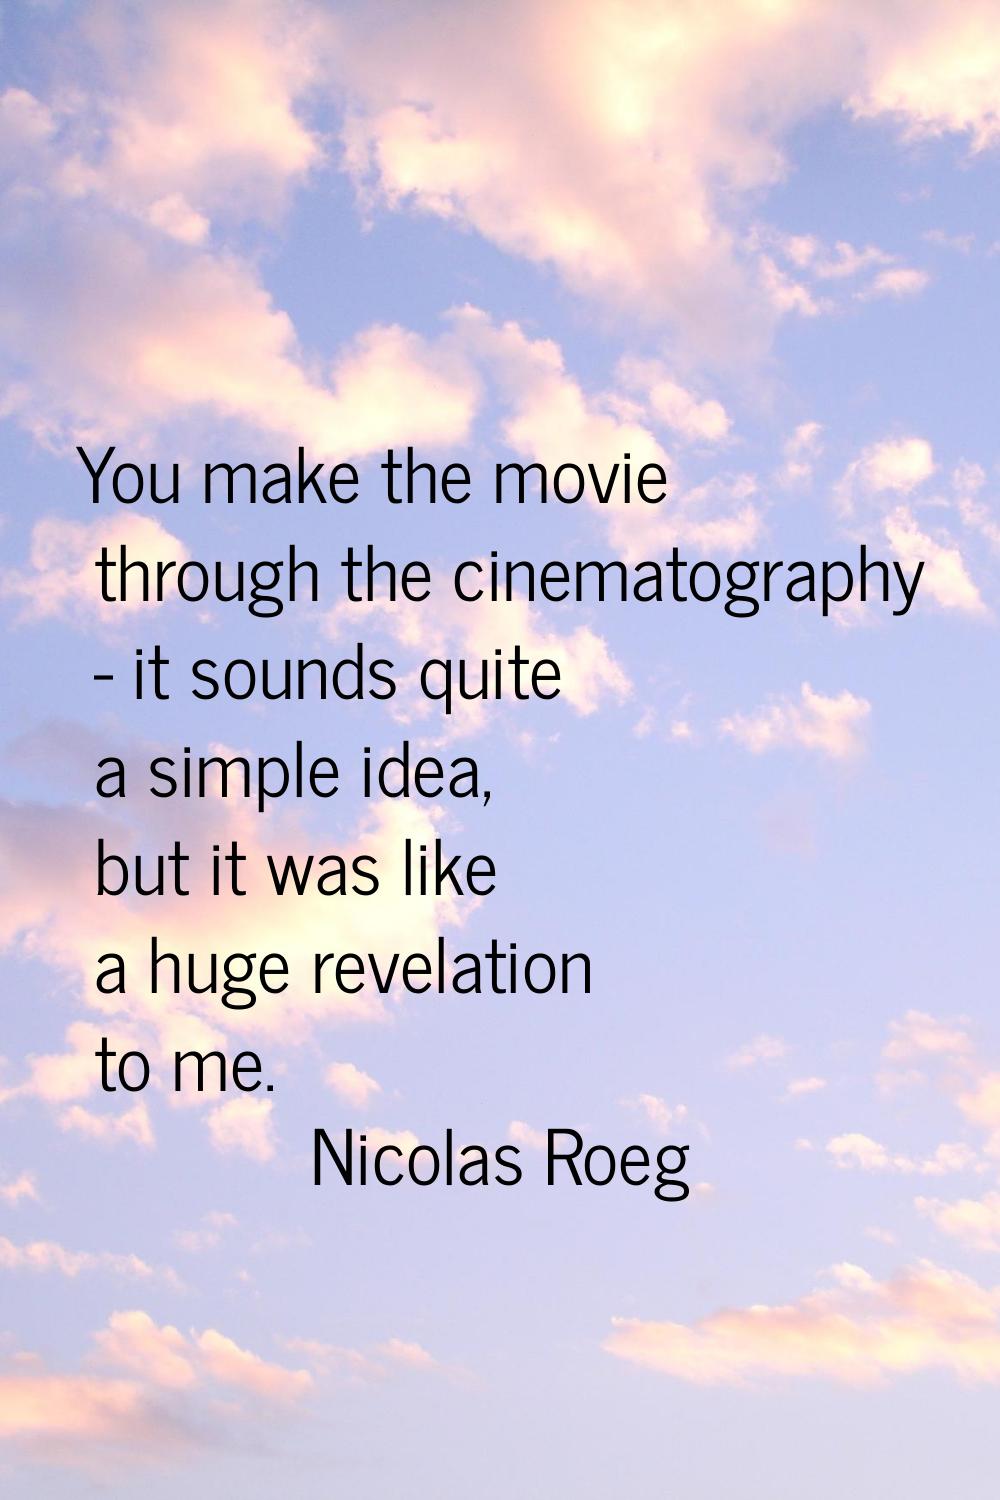 You make the movie through the cinematography - it sounds quite a simple idea, but it was like a hu